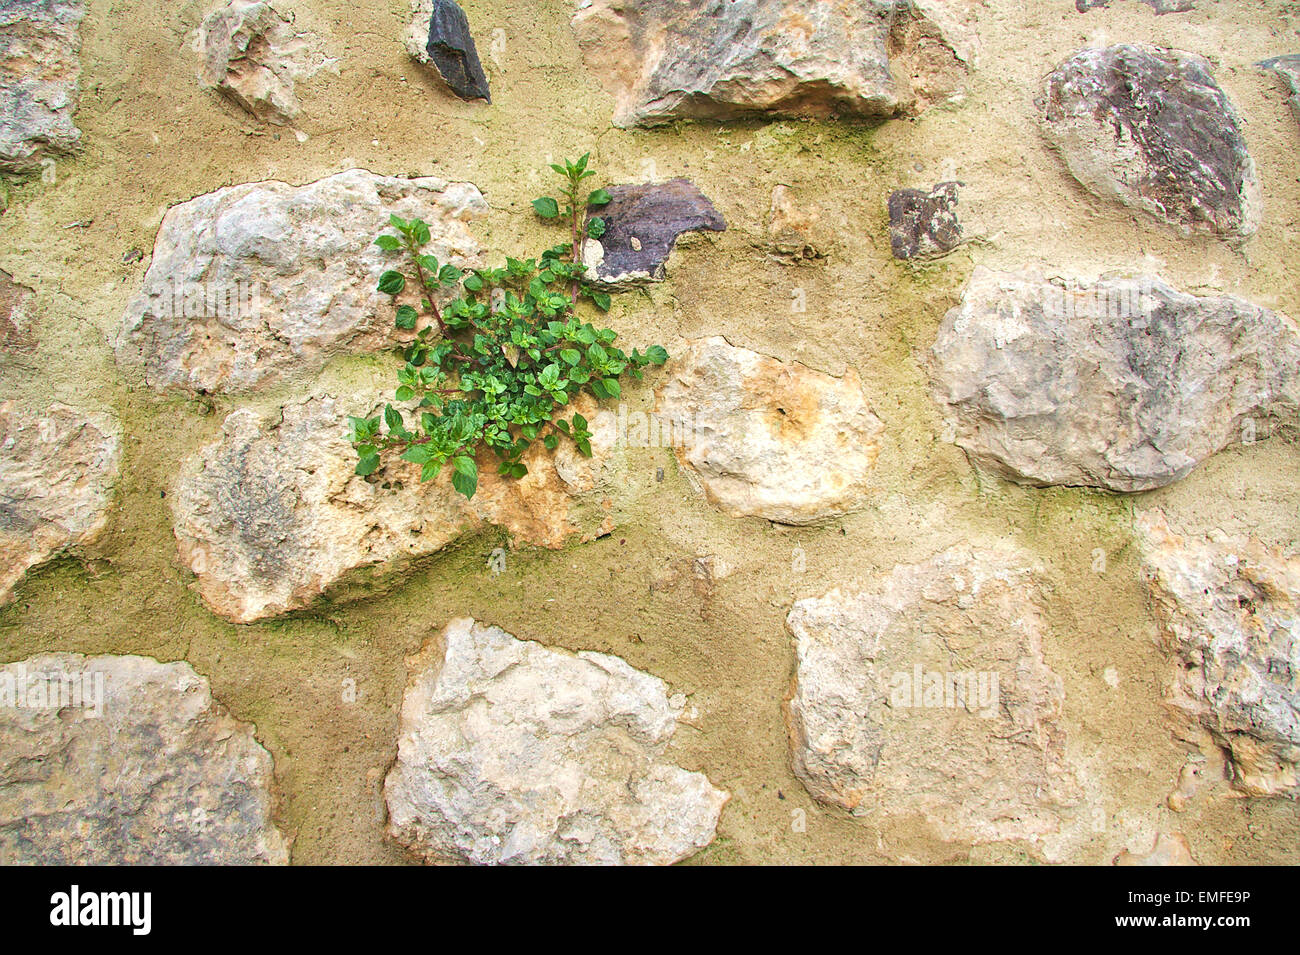 Old stone rock wall with small green flowers growing on it Stock Photo